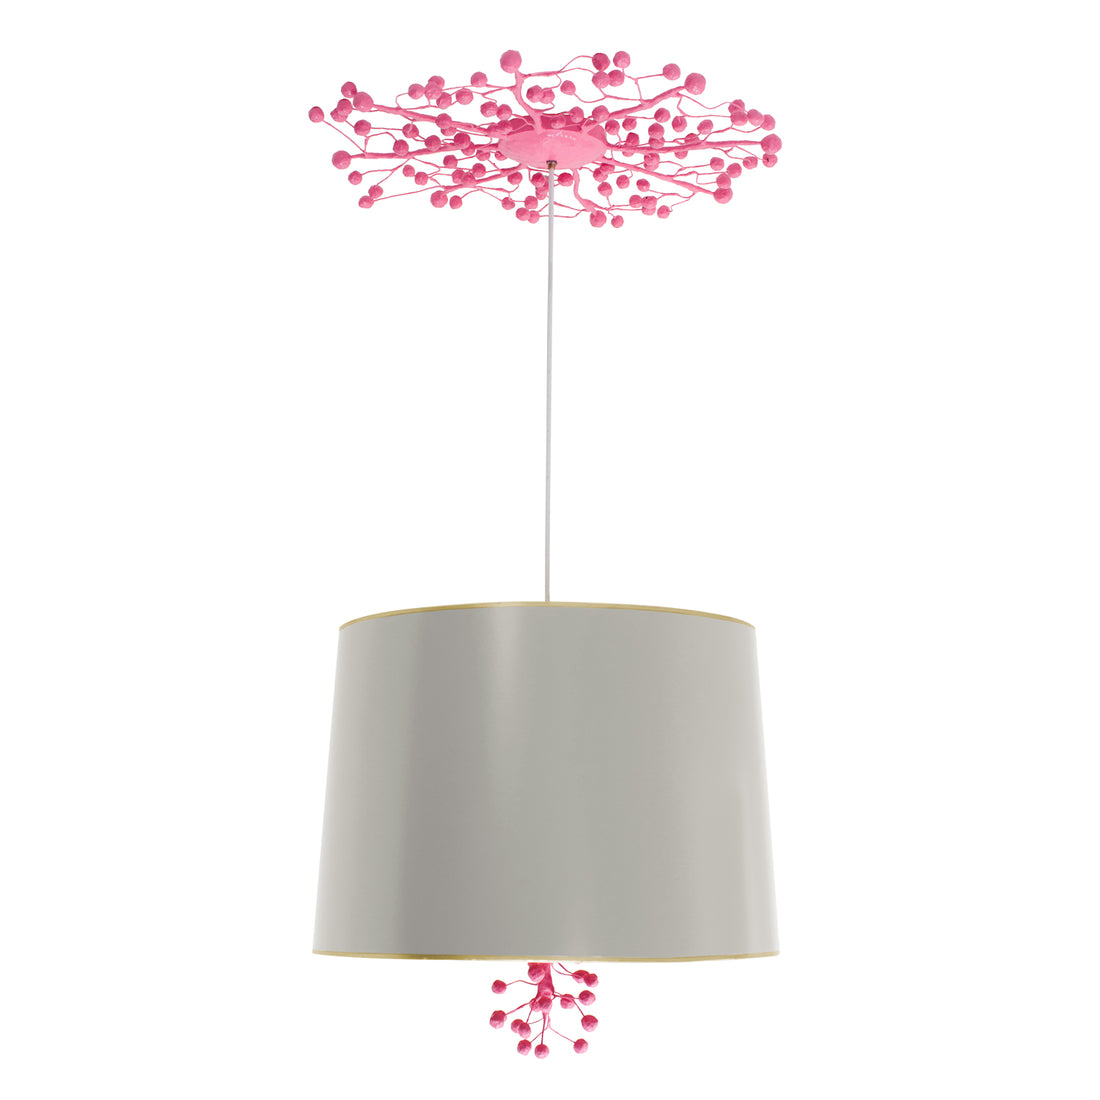 gray and pink Marsi hanging light with papier mache berry design canopy and finial